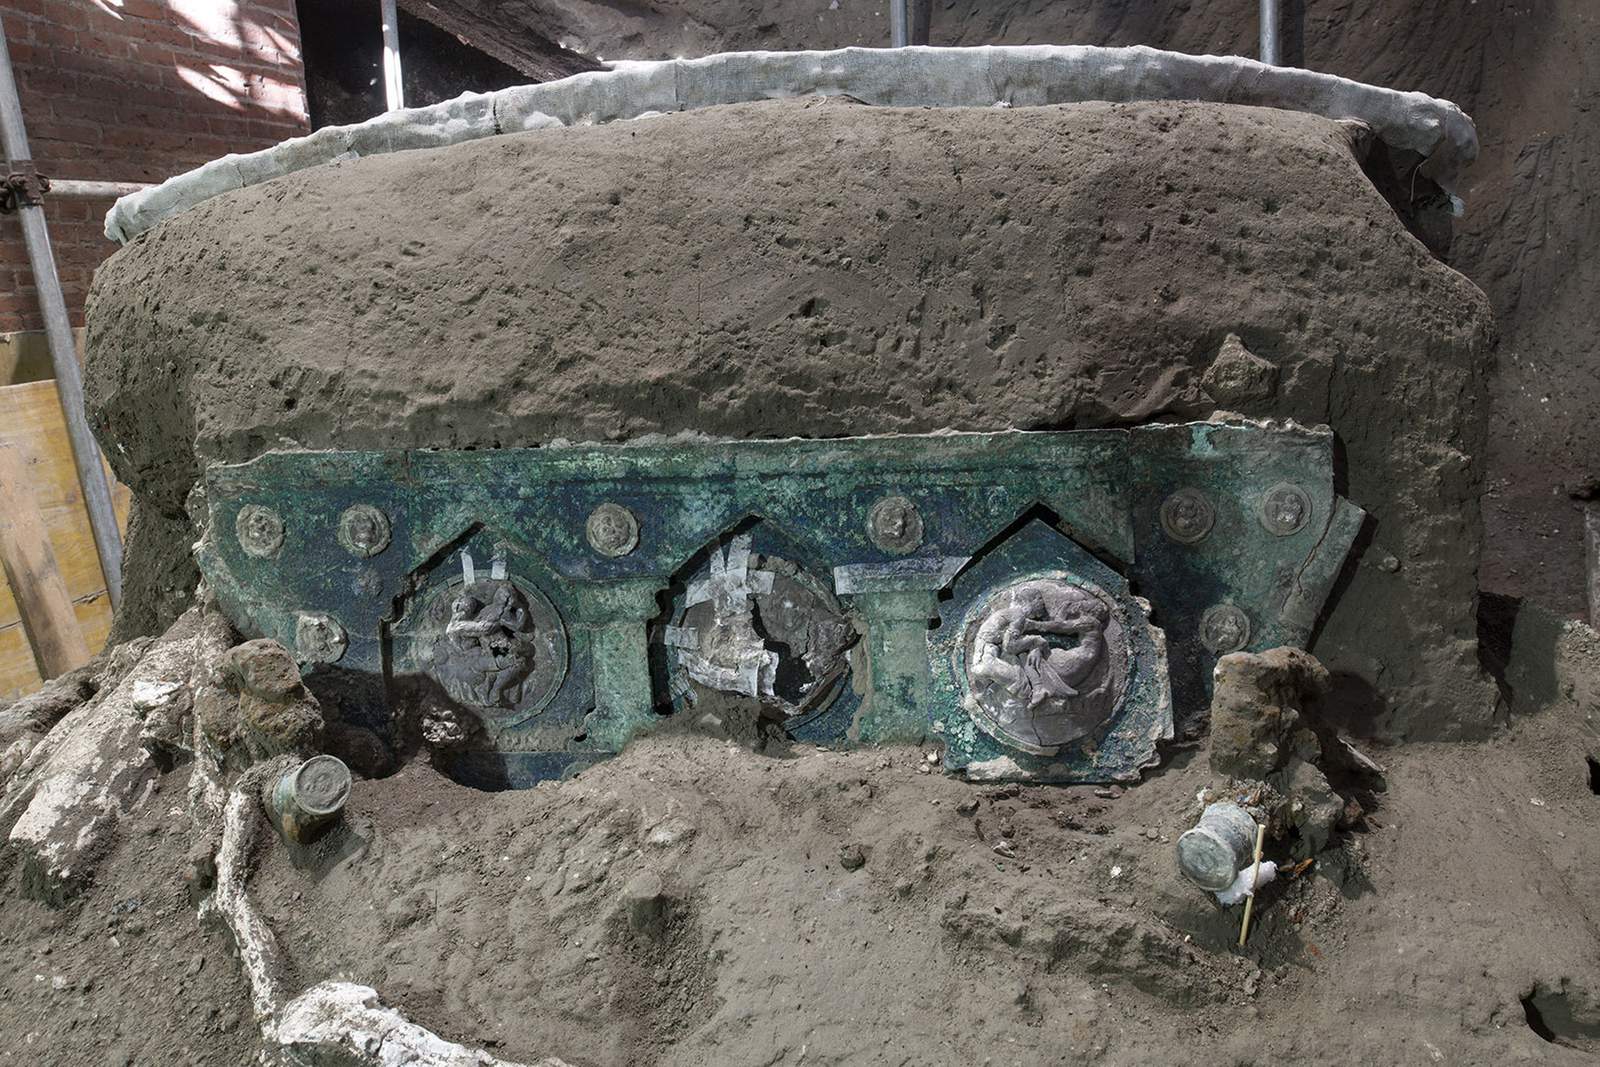 Archeologists find intact ceremonial chariot near Pompeii